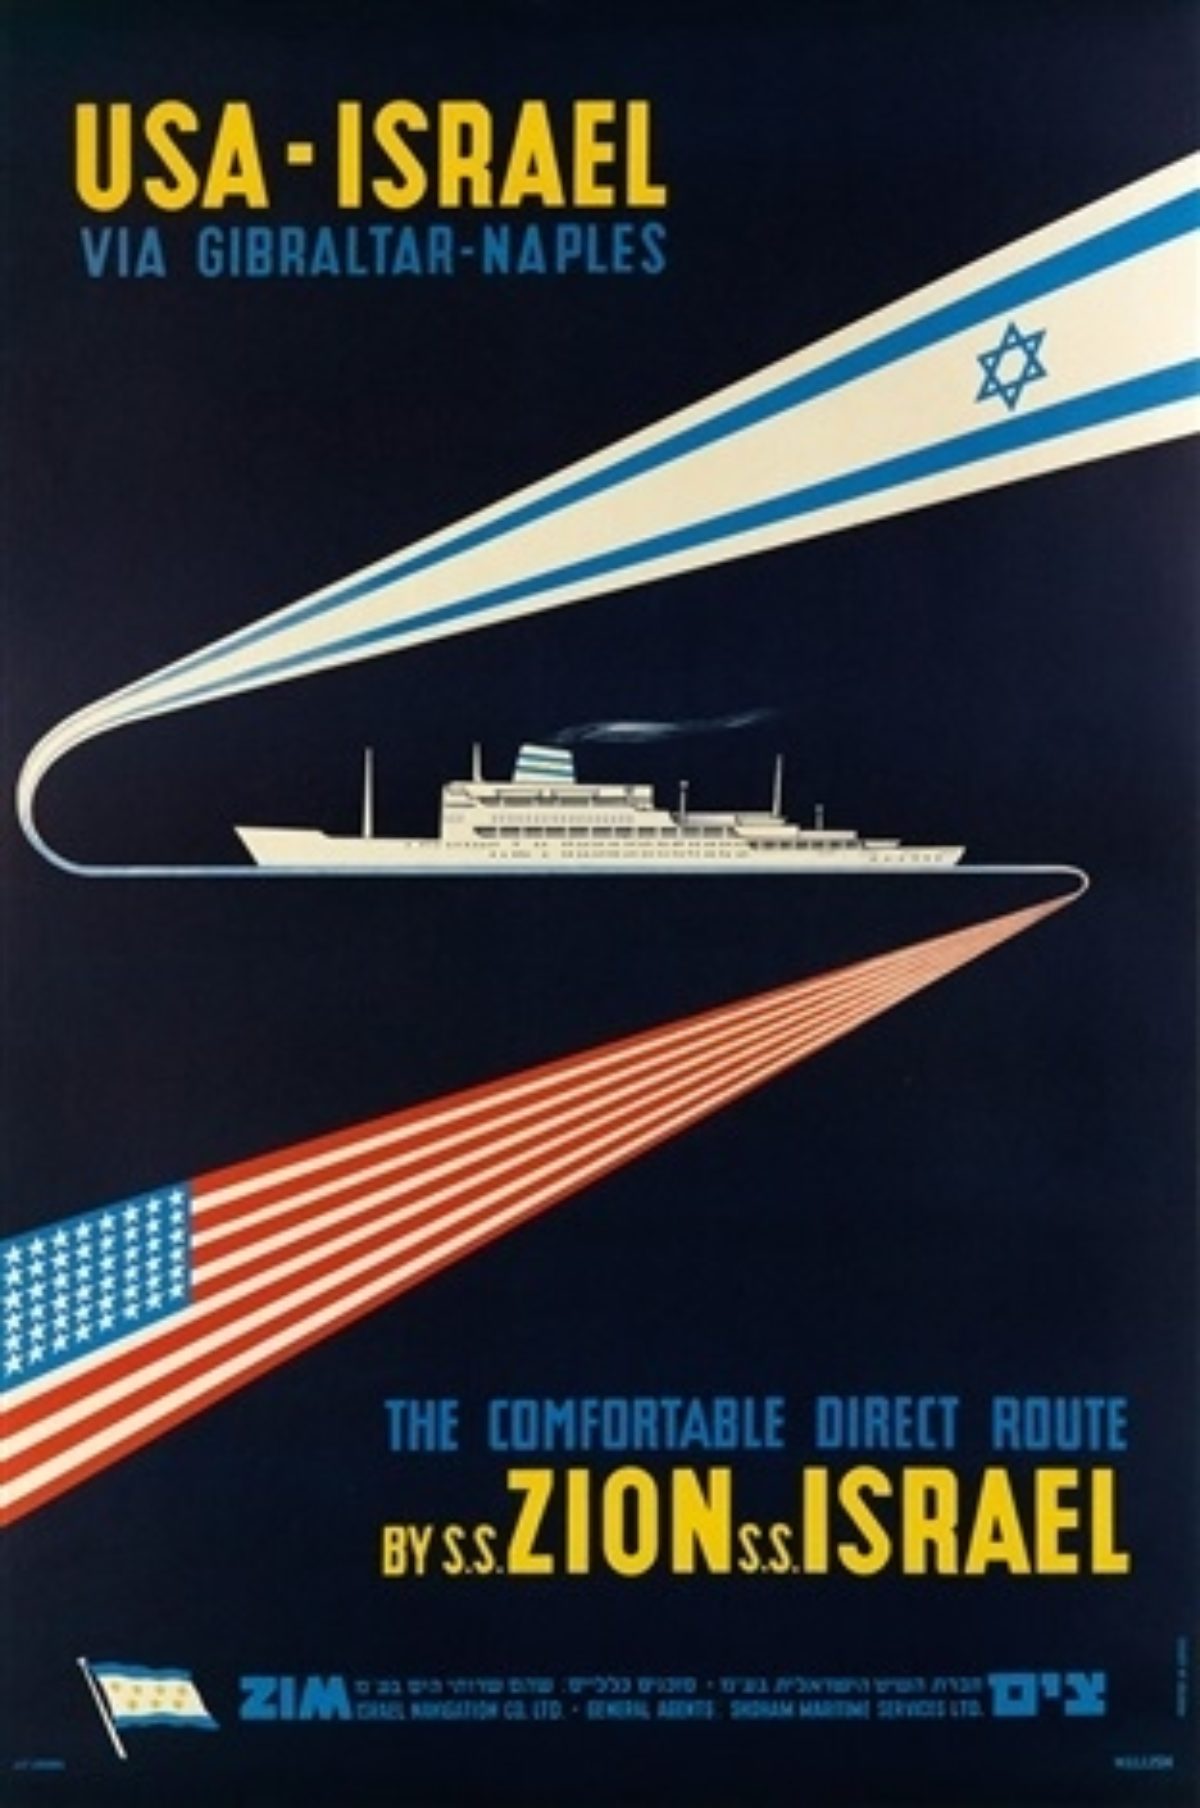 by-s.s.-zion-s.s.-israel